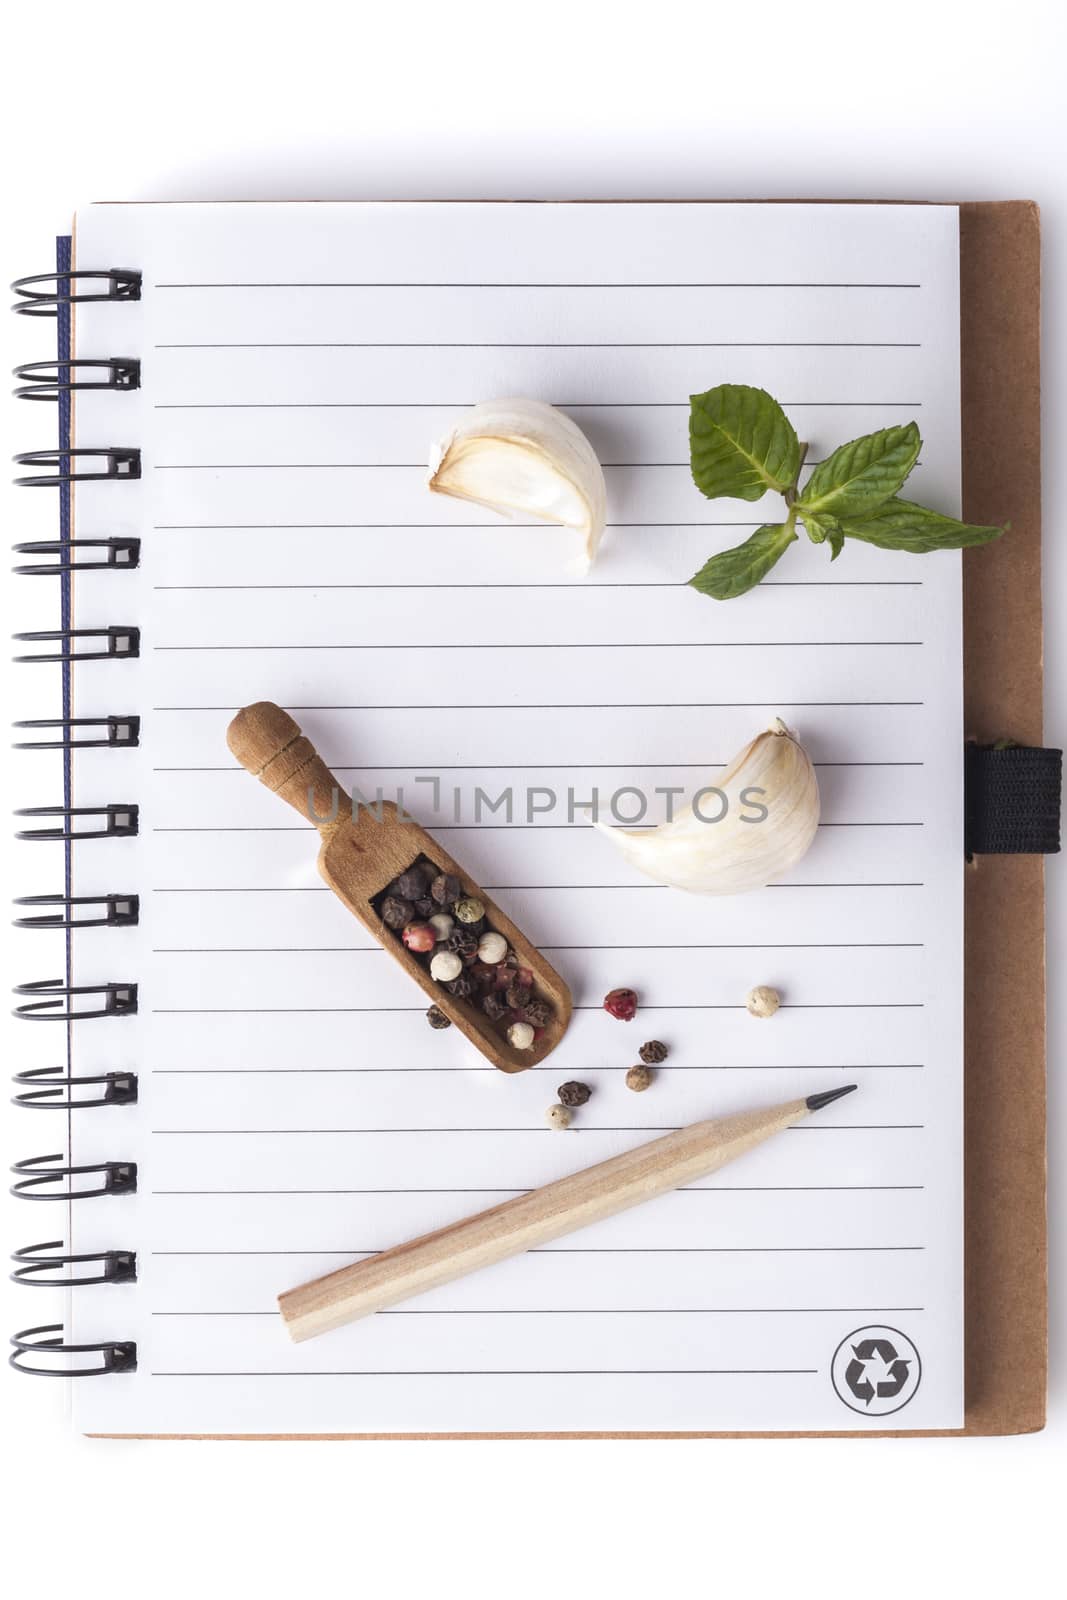 Pencil on Notebook With Garlick and Black Pepper